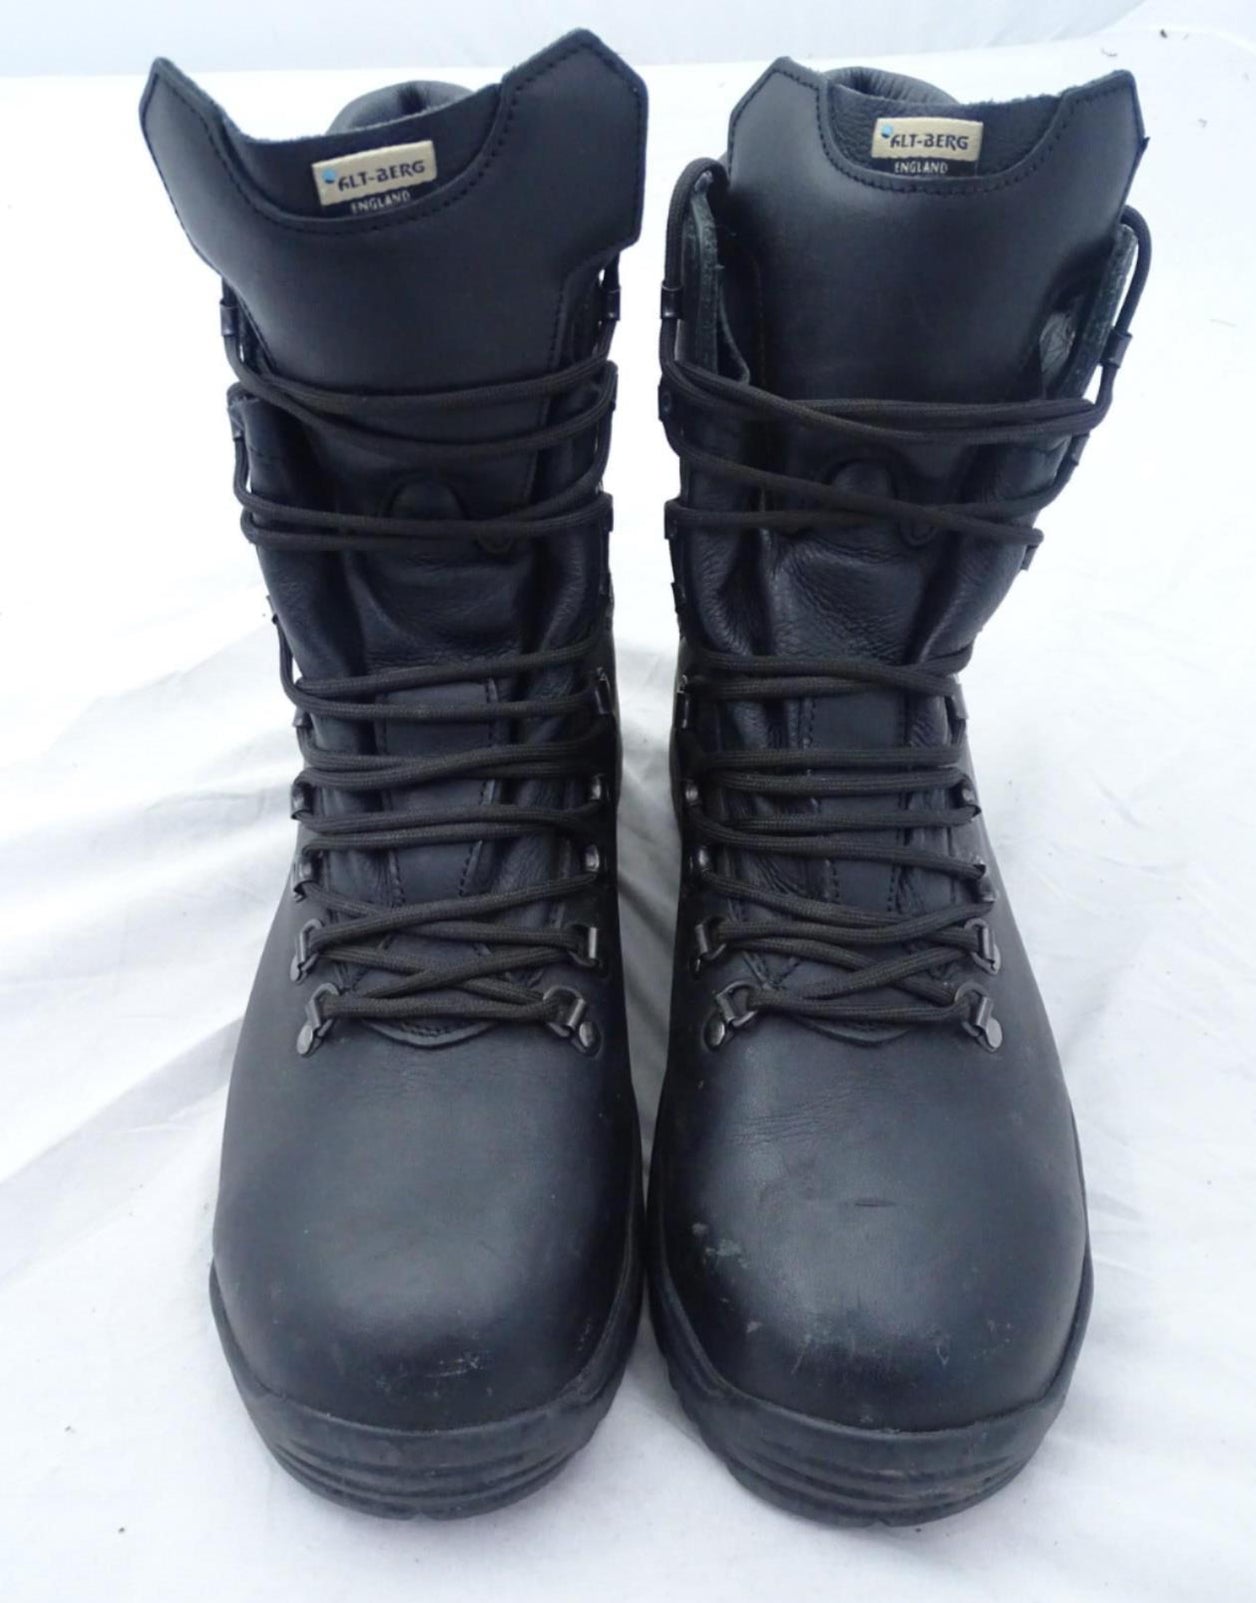 Used Altberg Peacekeeper P3 Public Order Boots ABP3U03 — One Stop Cop Shop